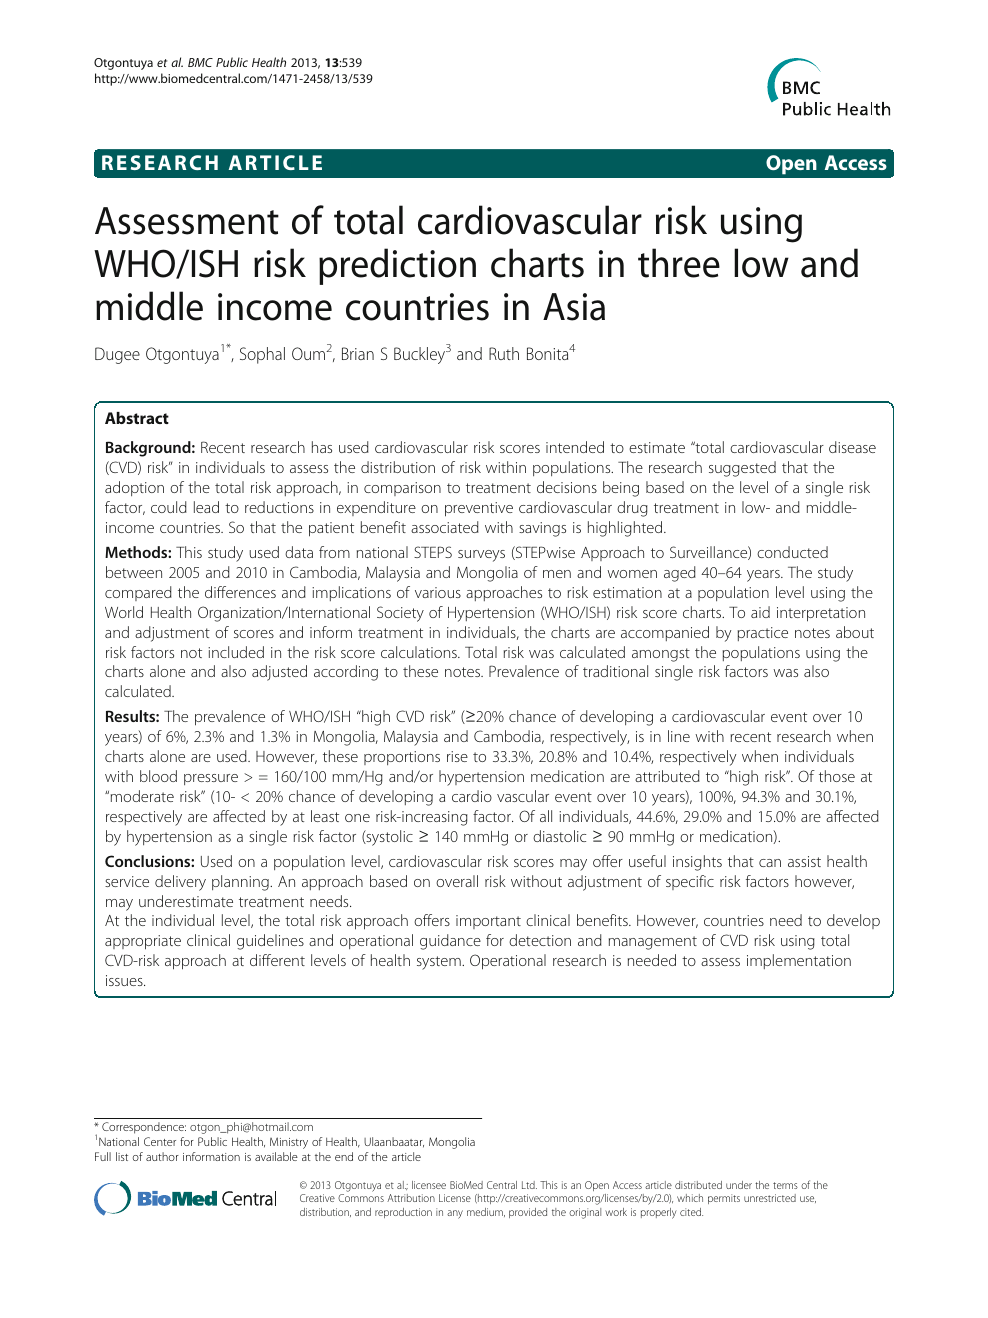 Assessment Of Total Cardiovascular Risk Using Who Ish Risk Prediction Charts In Three Low And Middle Income Countries In Asia Topic Of Research Paper In Health Sciences Download Scholarly Article Pdf And